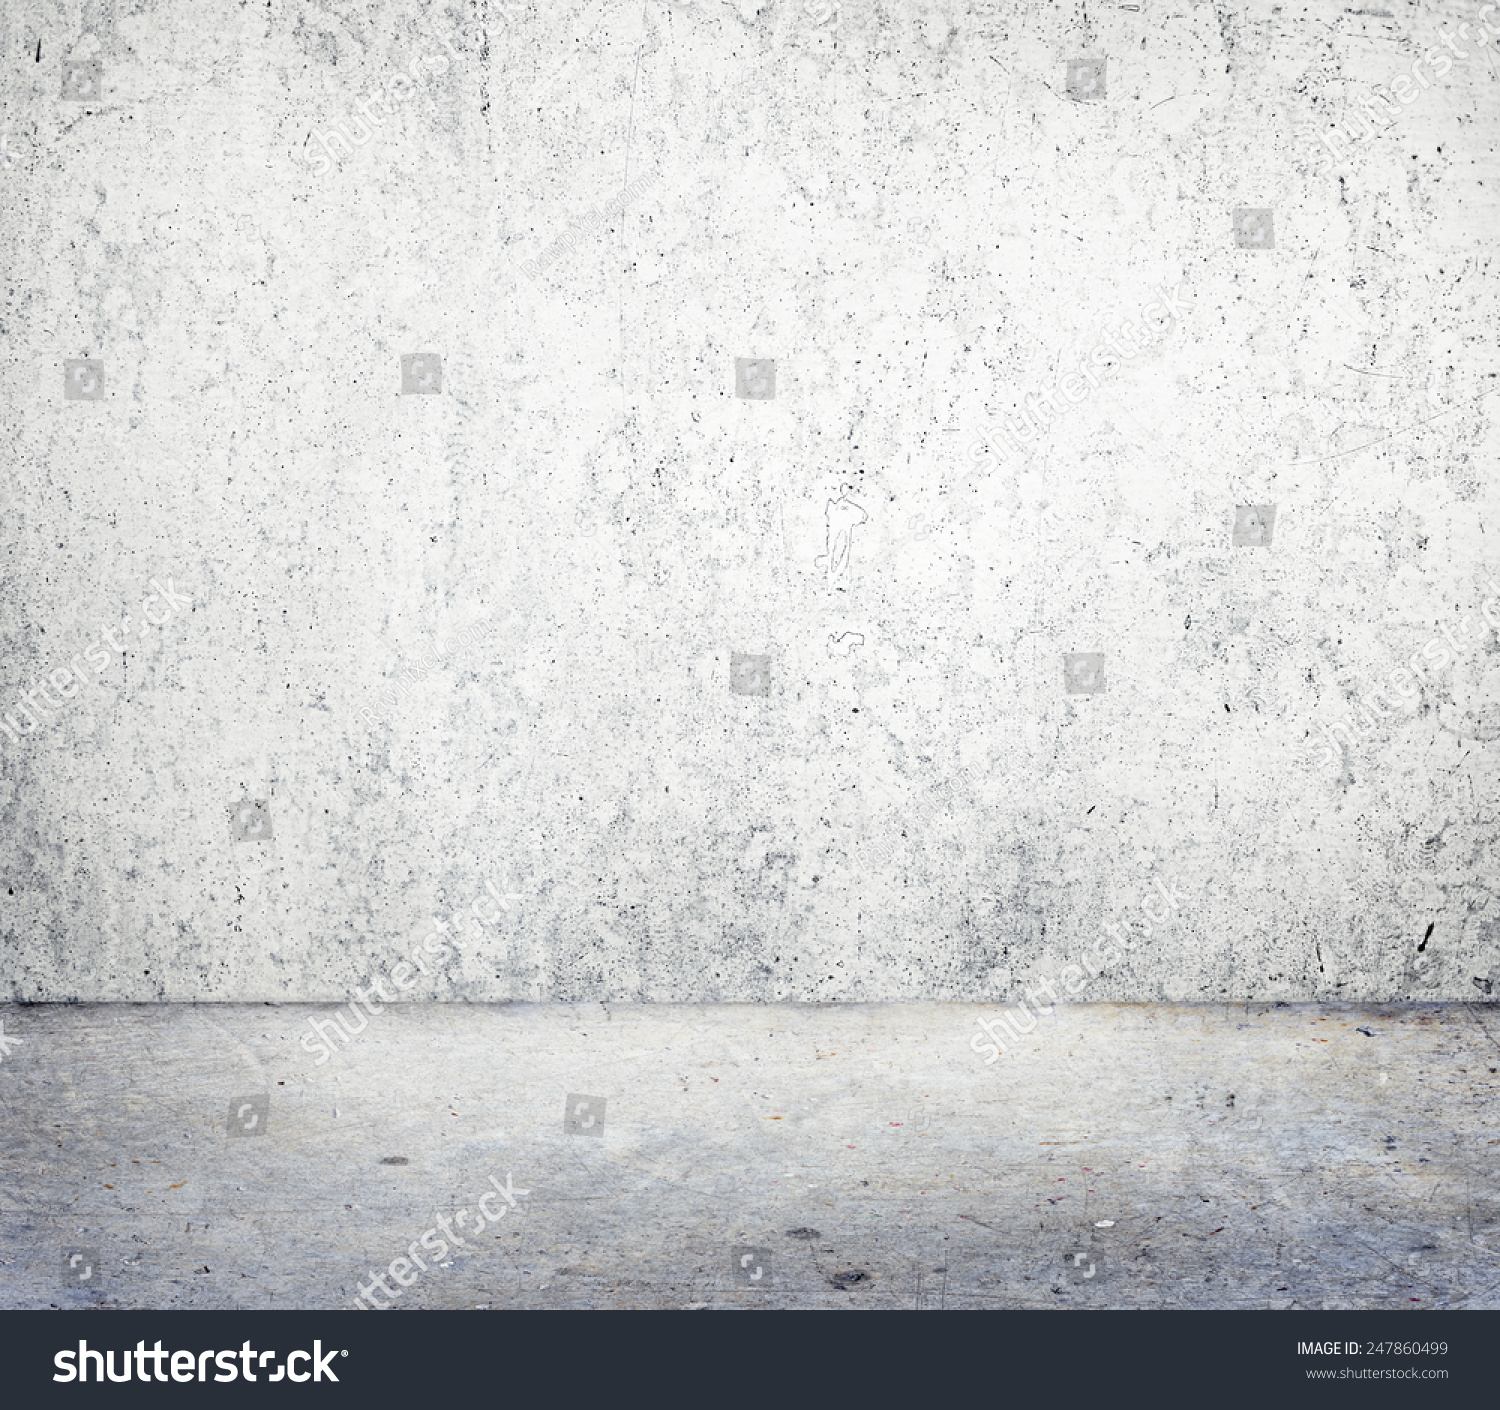 Grunge Concrete Material Background Texture Wall Stock Photo ...